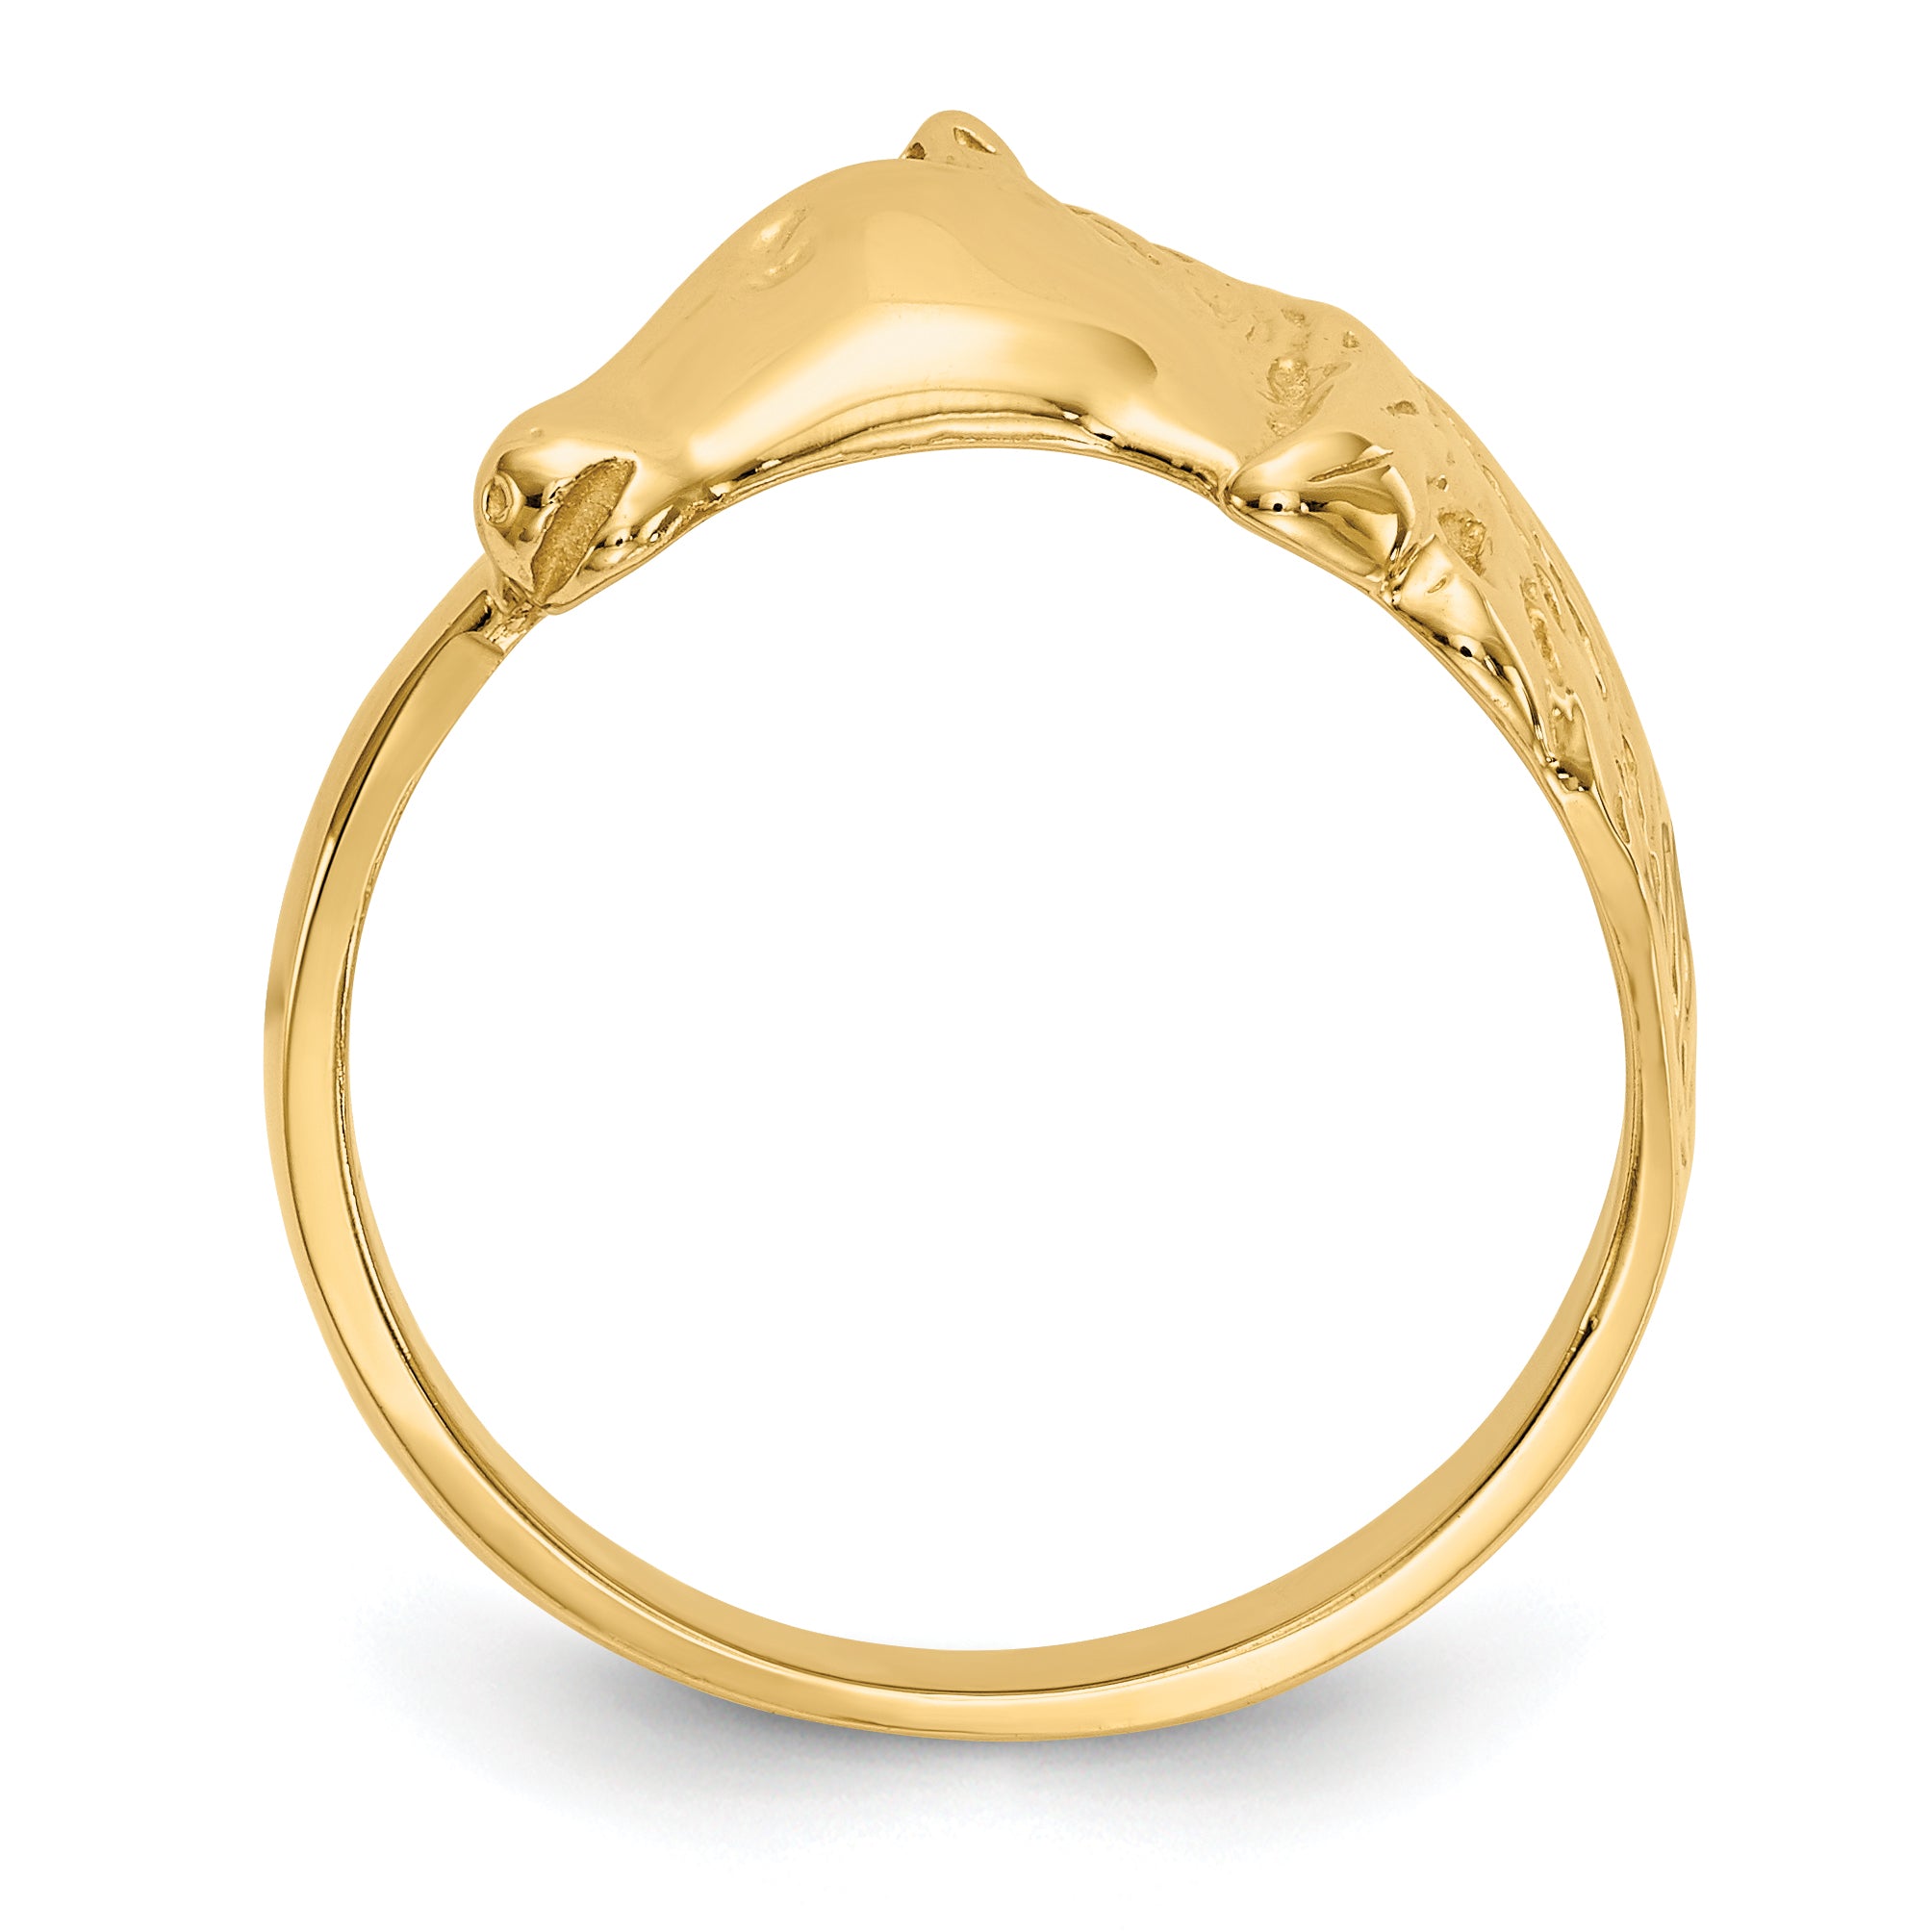 14K Gold Polished Horse Head Ring